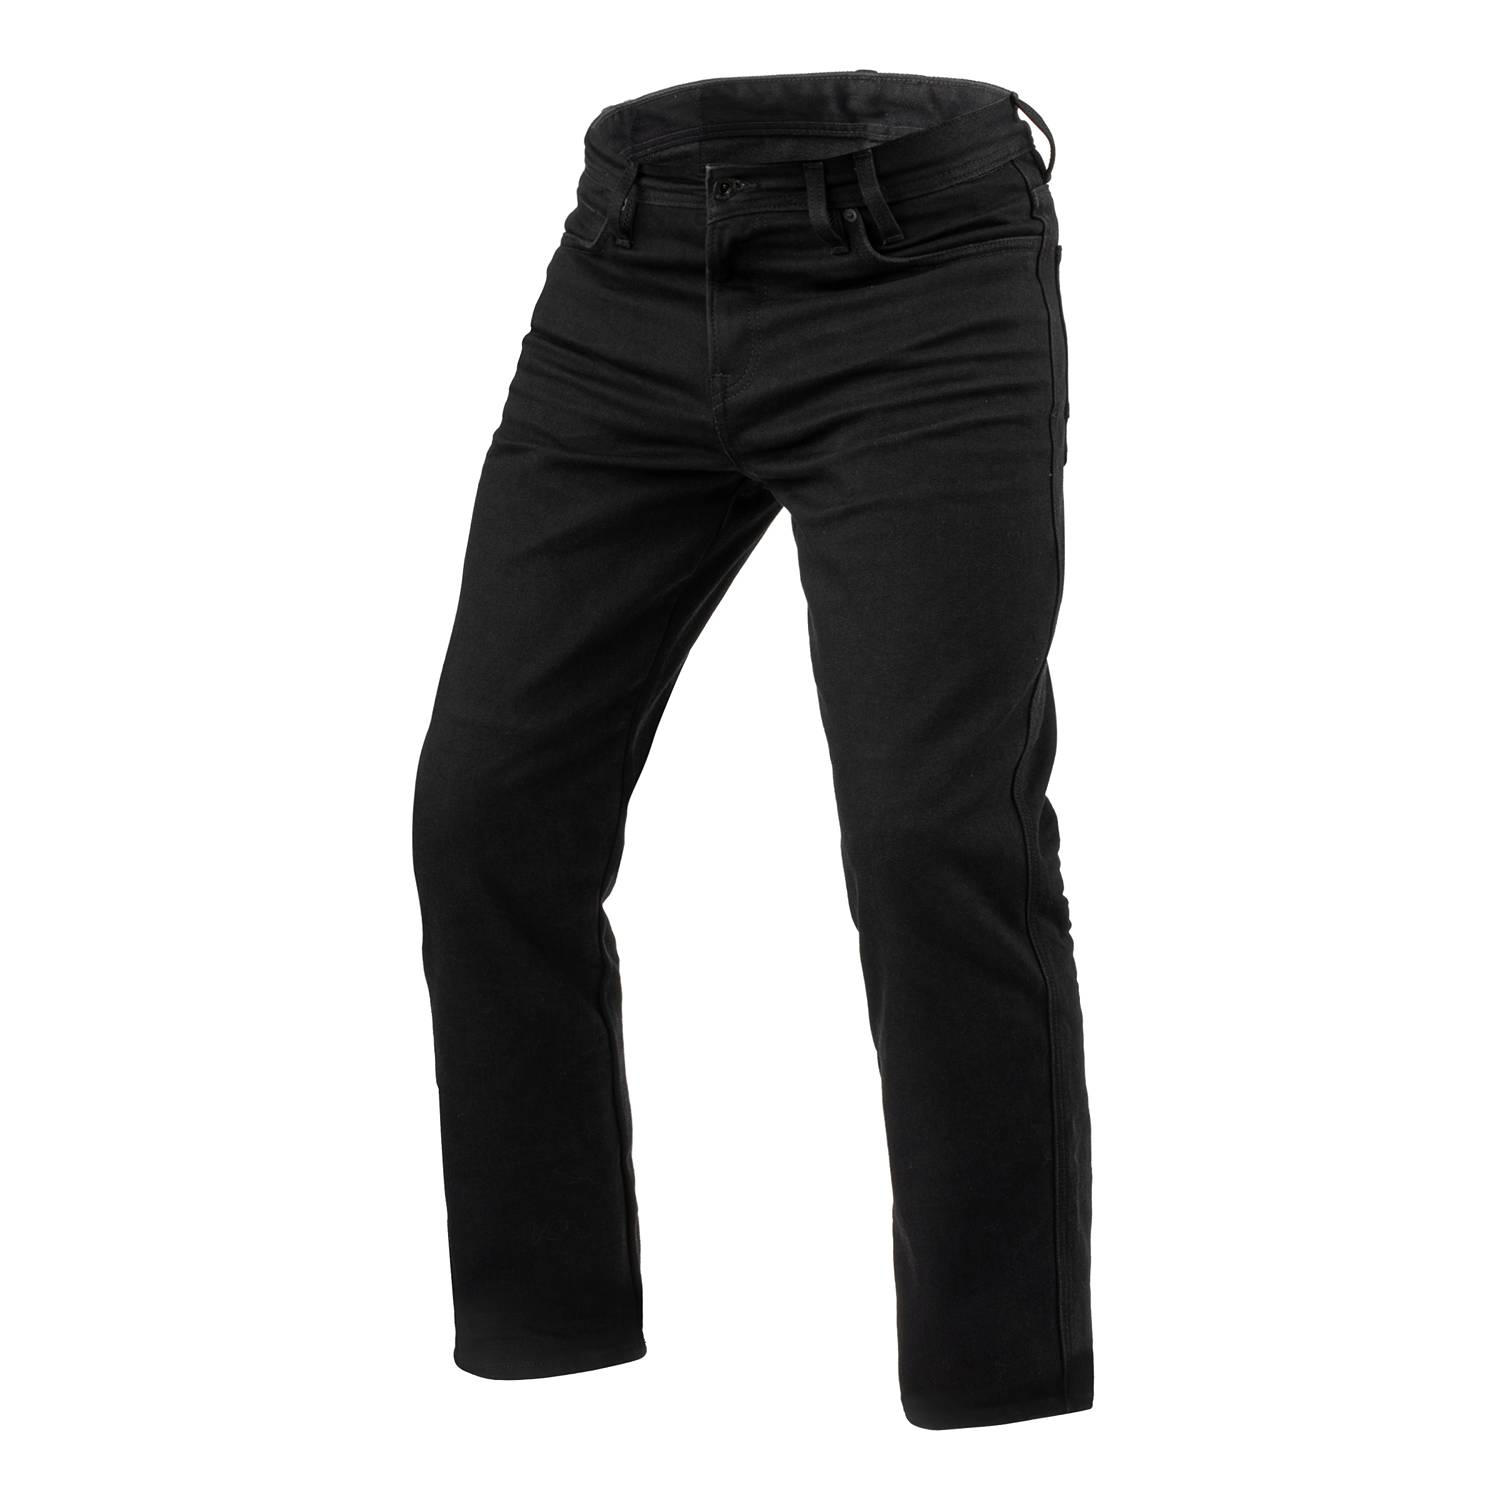 Image of EU REV'IT! Jeans Lombard 3 RF Black L34 Motorcycle Jeans Taille L34/W31